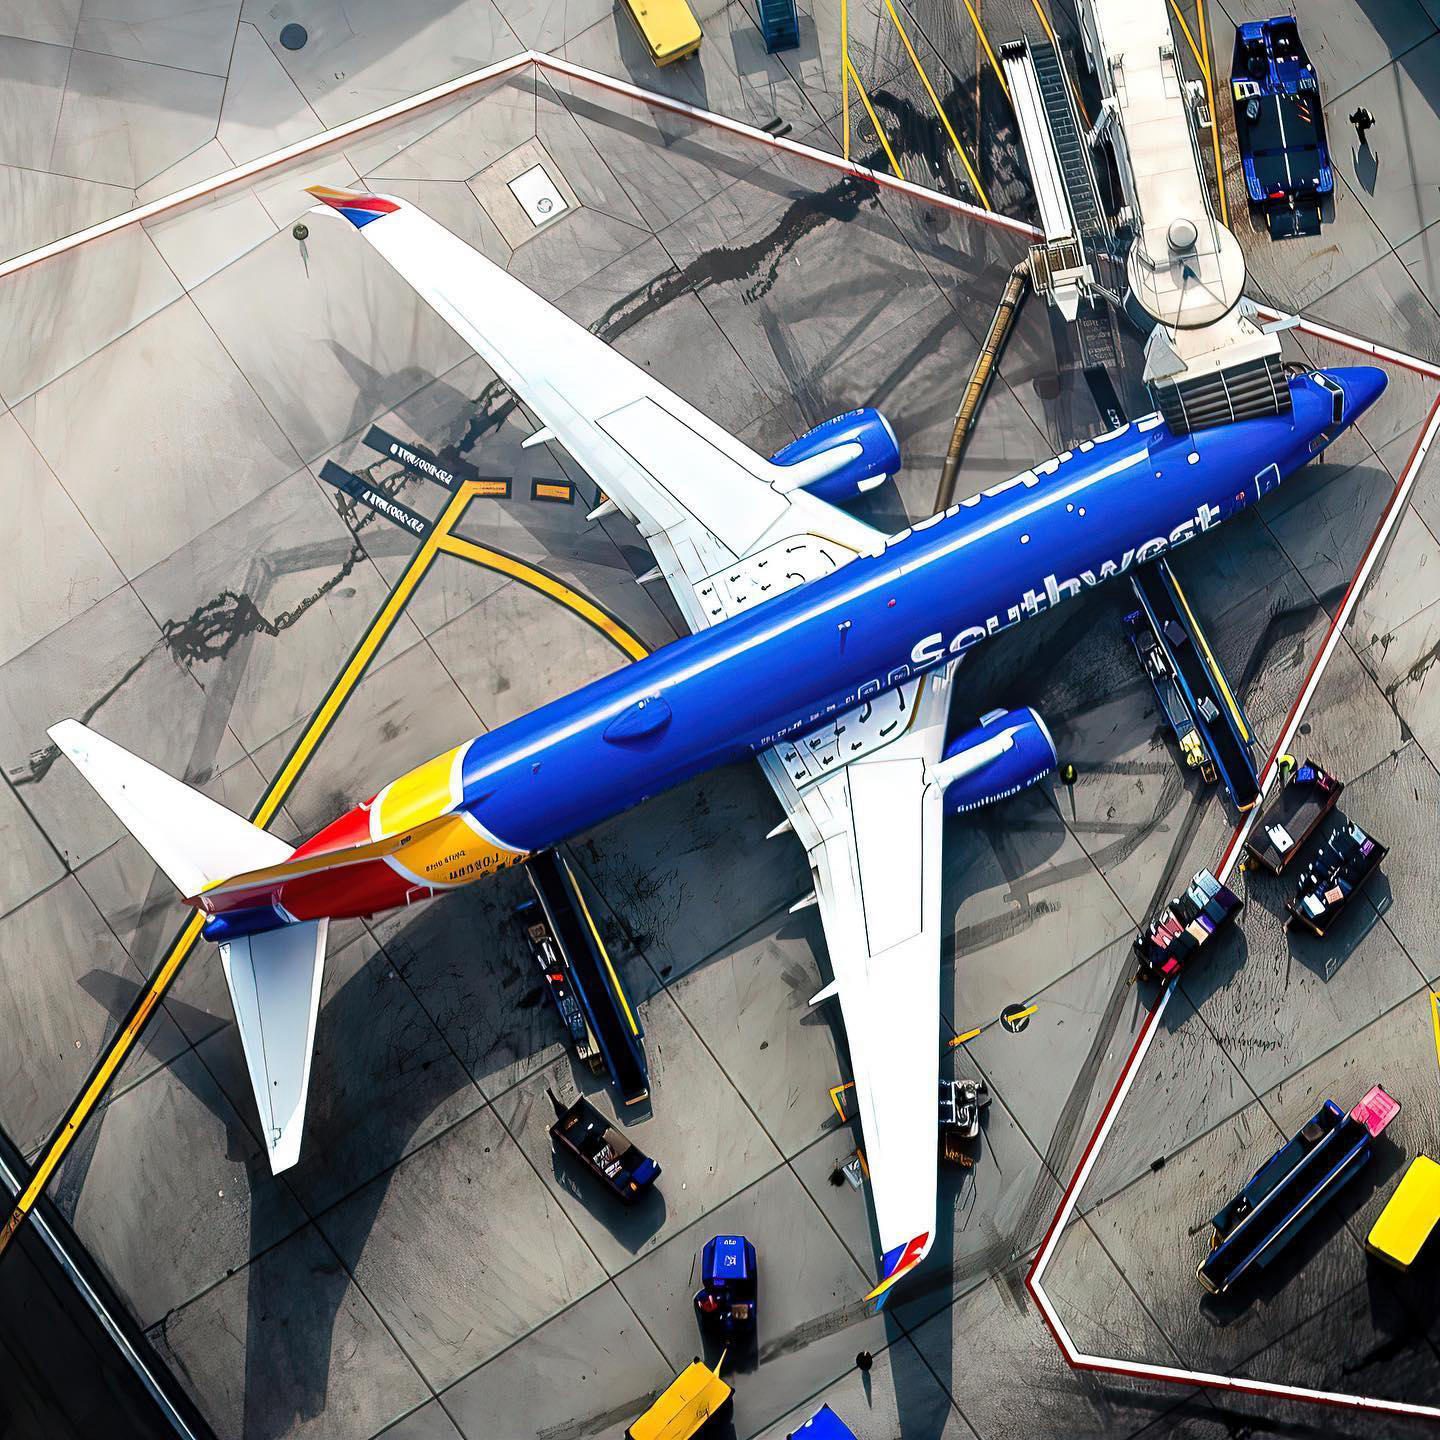 Southwest Airlines - Plot twist, an aircraft from above took a picture of an aircraft below